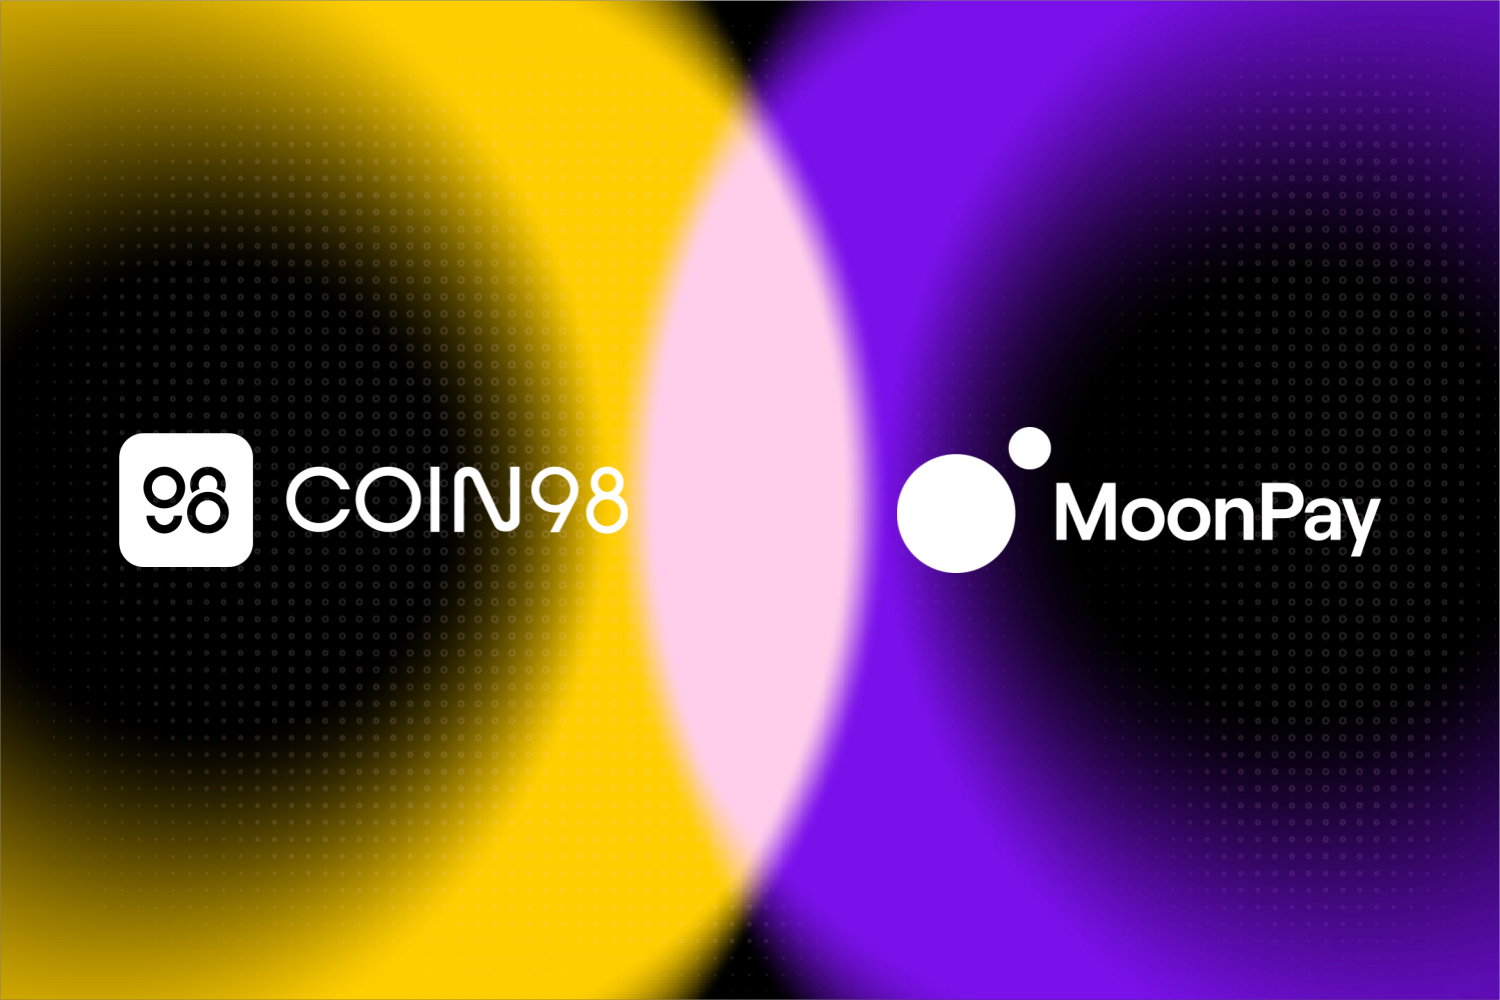 Coin98 integrates MoonPay, bringing trillions of dollars from TraFi to DeFi